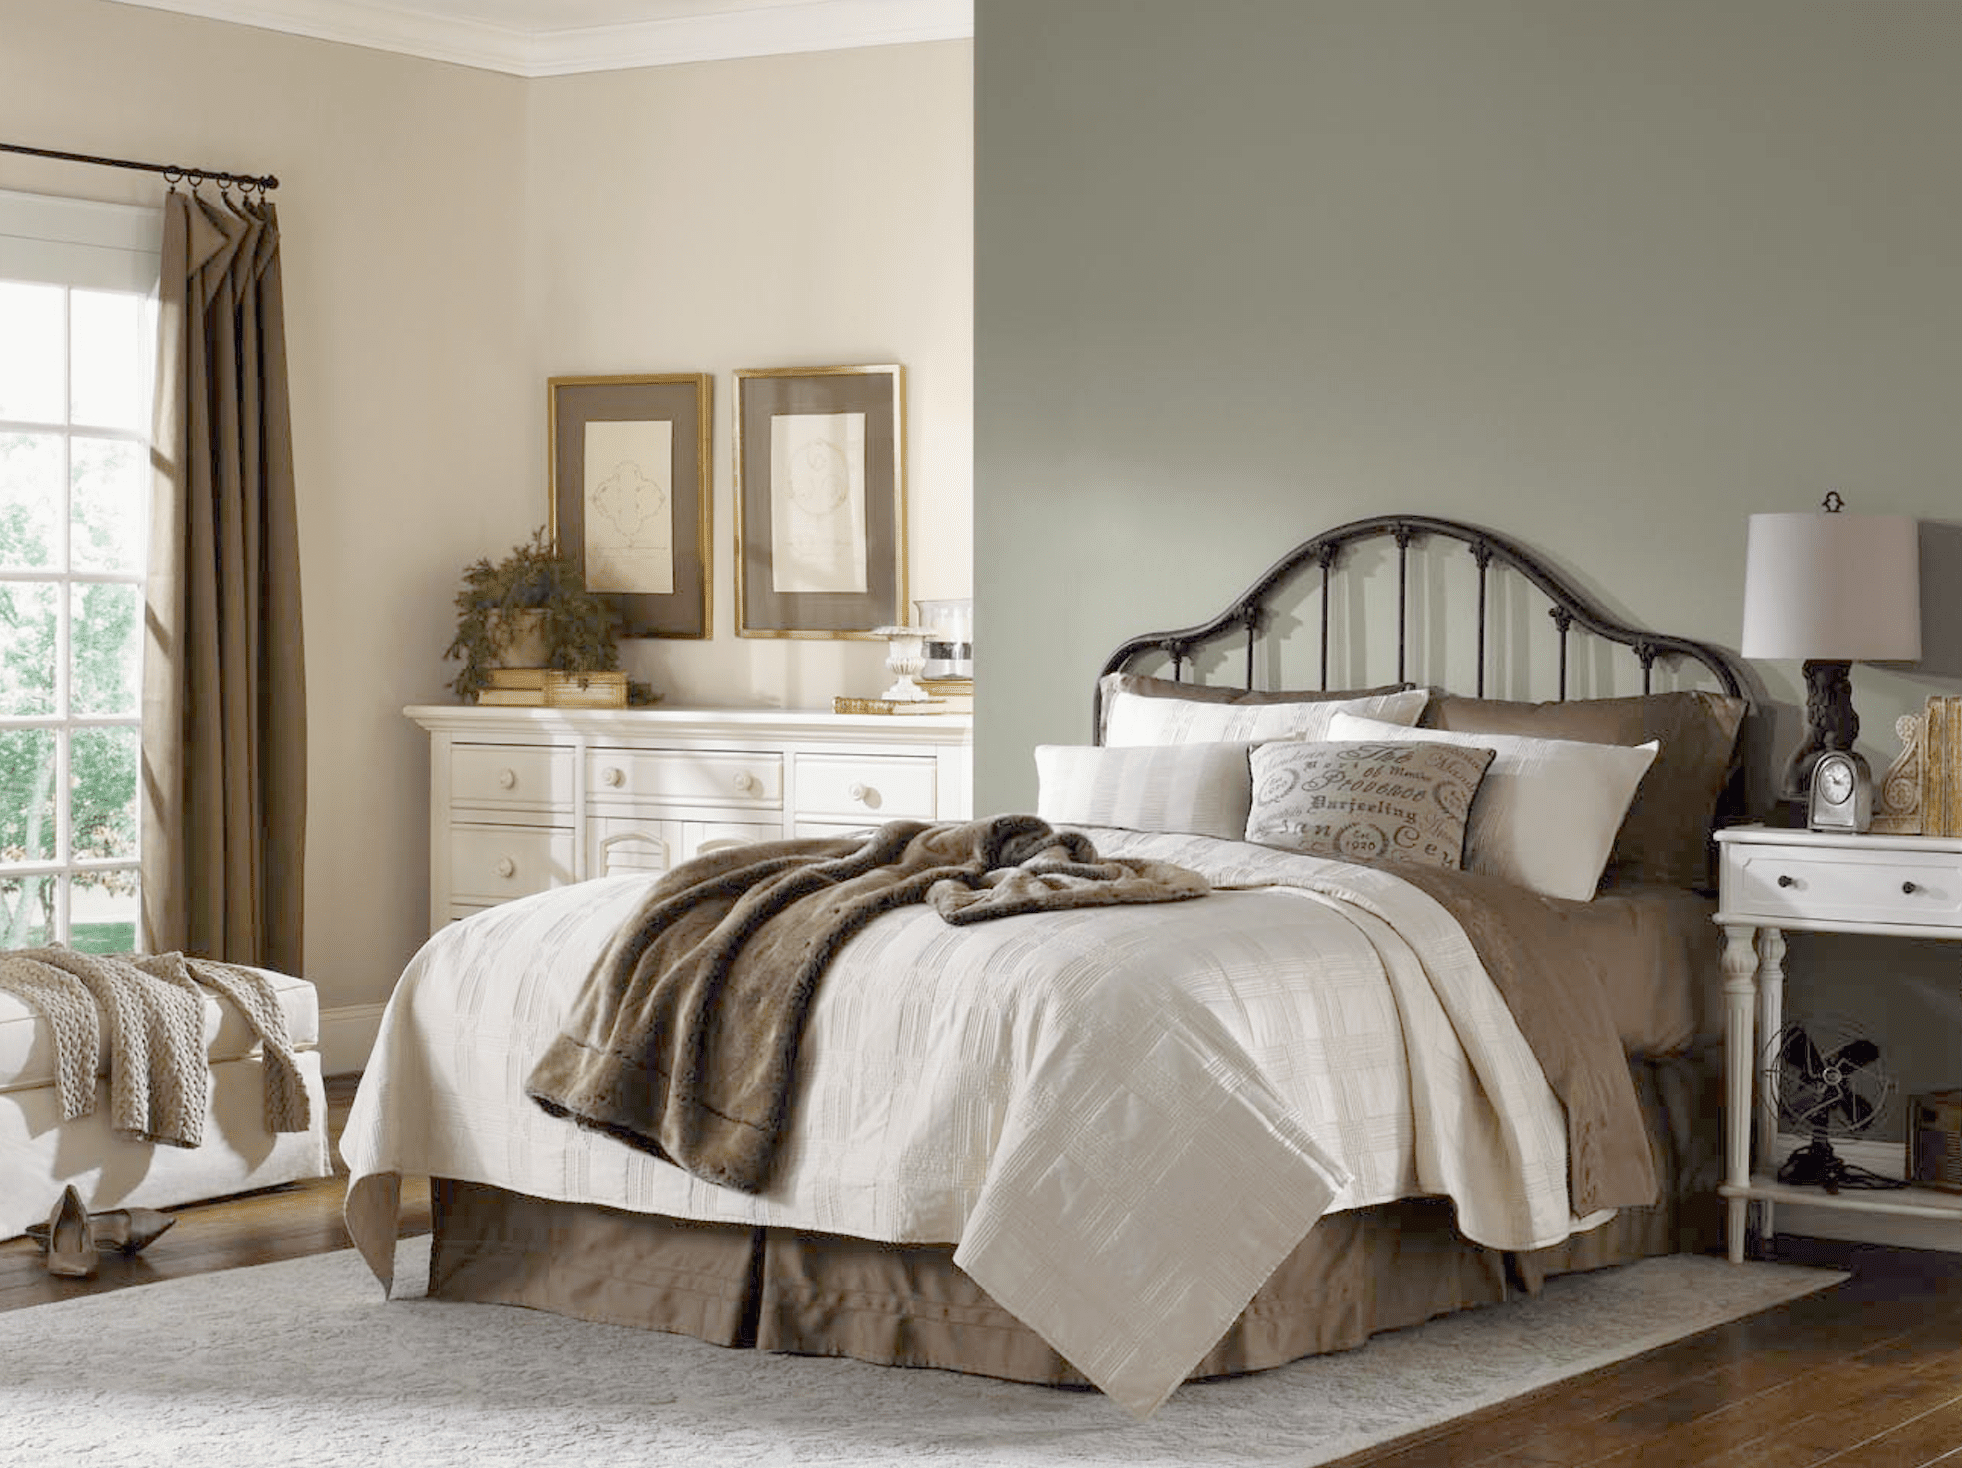 8 Relaxing Sherwin Williams Paint Colors For Bedrooms with regard to measurements 1962 X 1468